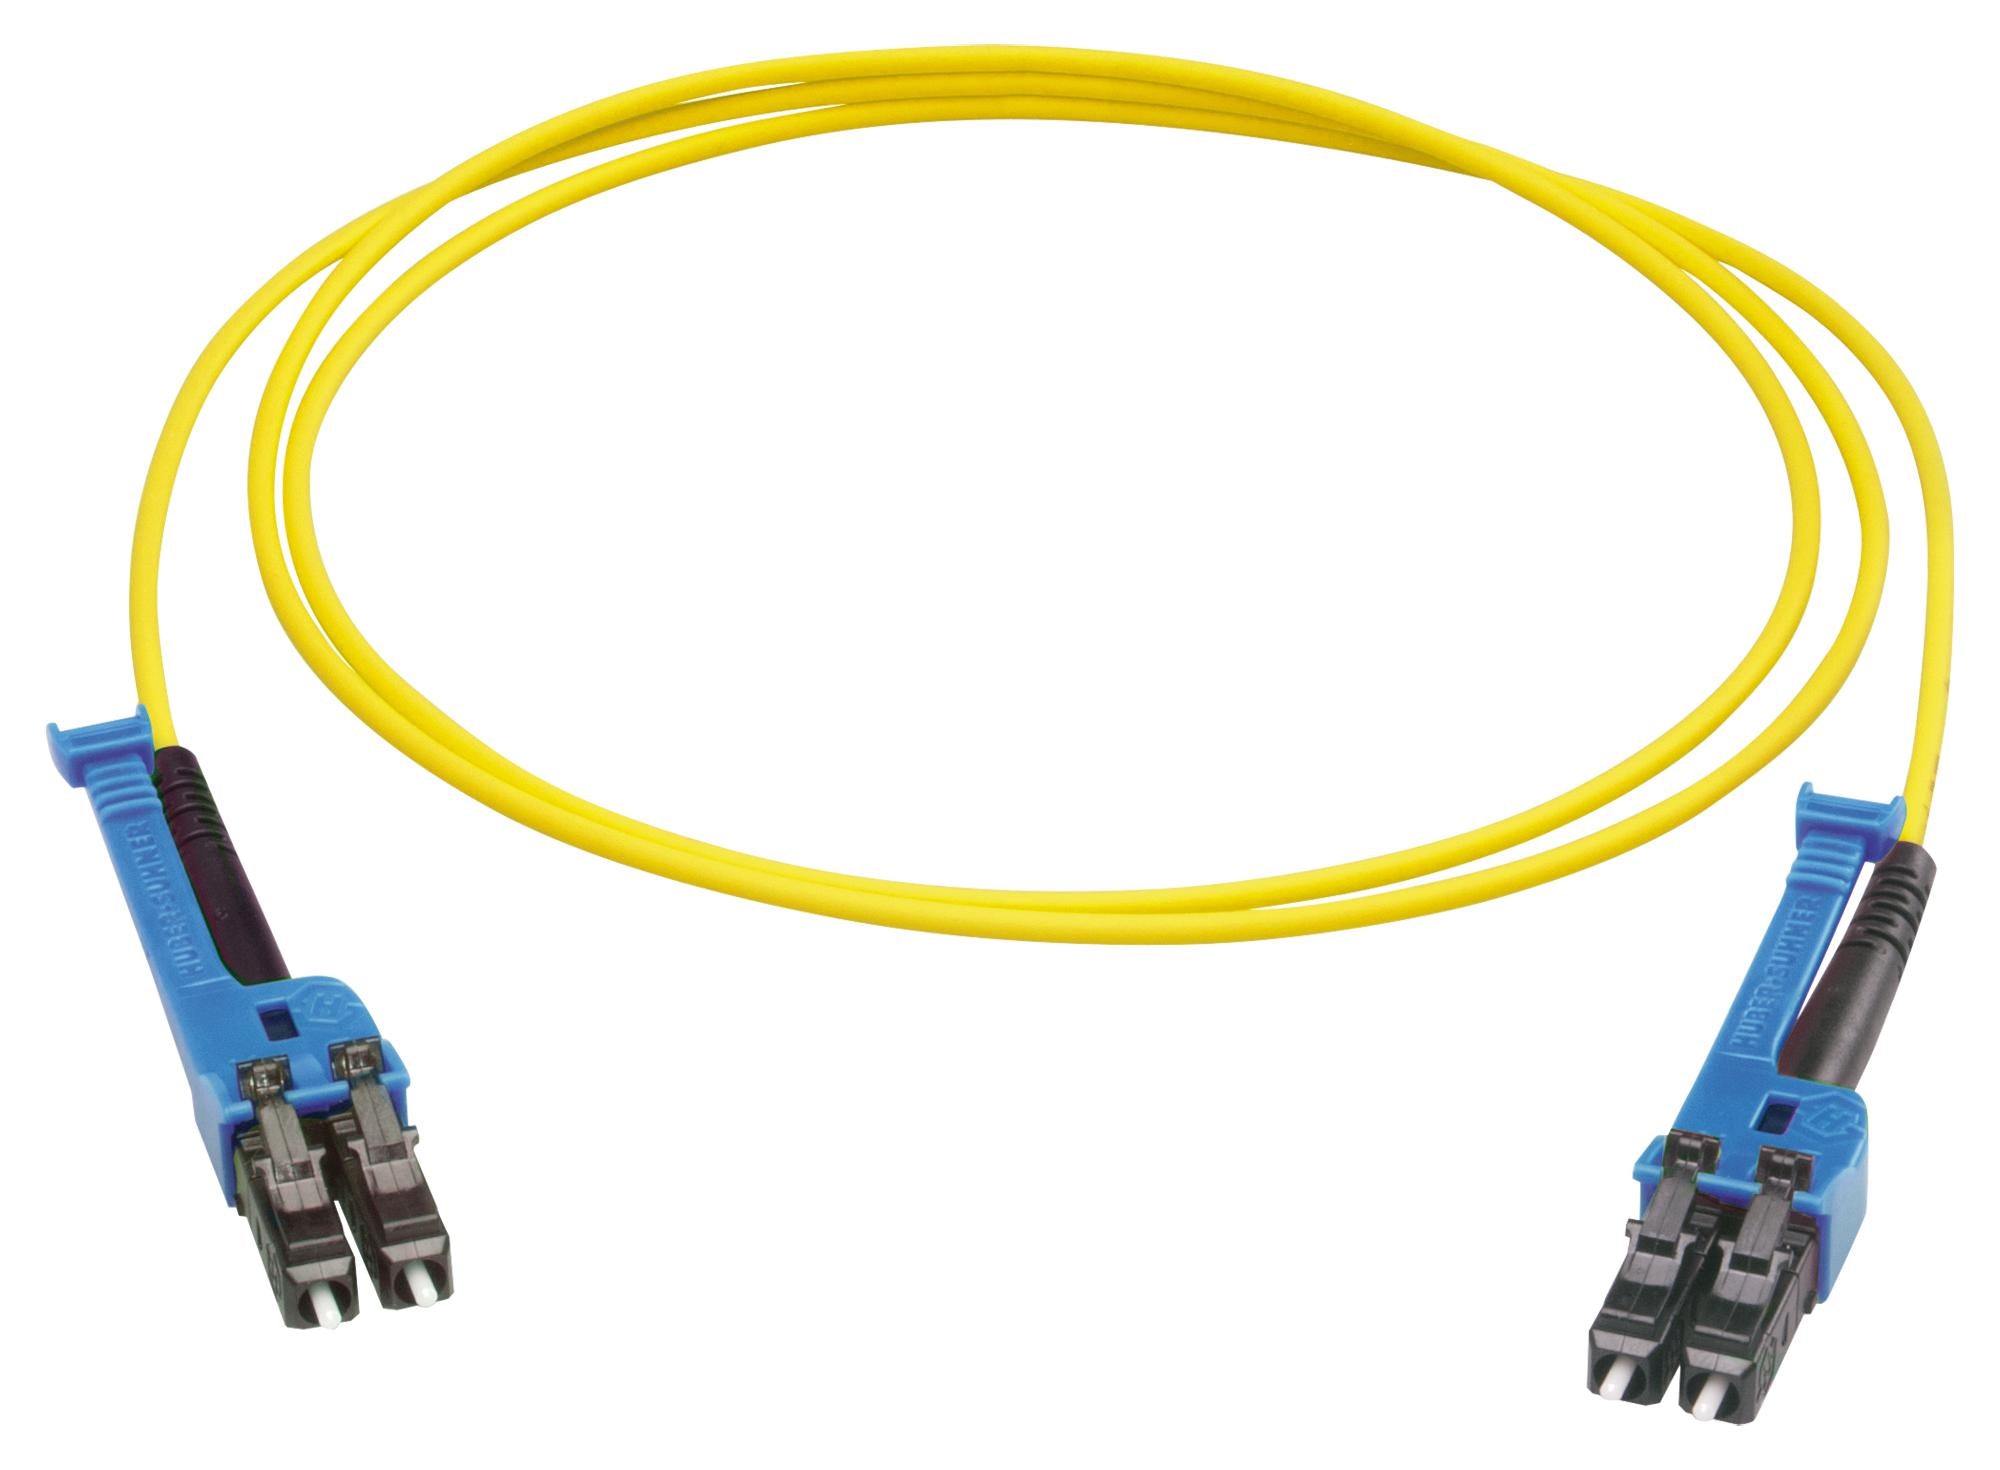 PCRS_LCUX_LCUX_A221T_03.0_SS PATCH CORD, SINGLEMODE, LC DUPLEX, 3M HUBER+SUHNER